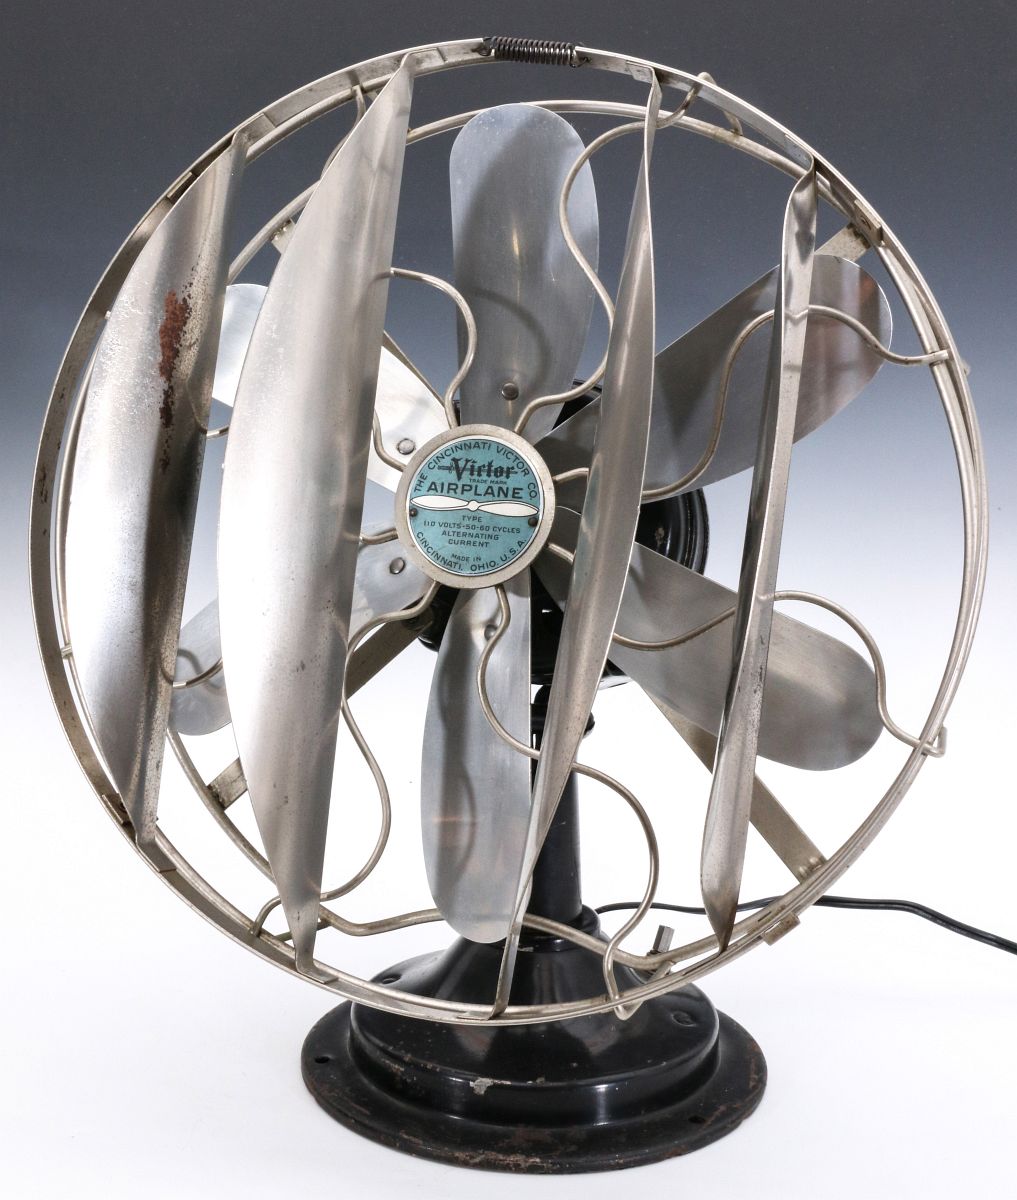 A VICTOR CO. 'AIRPLANE' FAN WITH BREEZE SPREADER